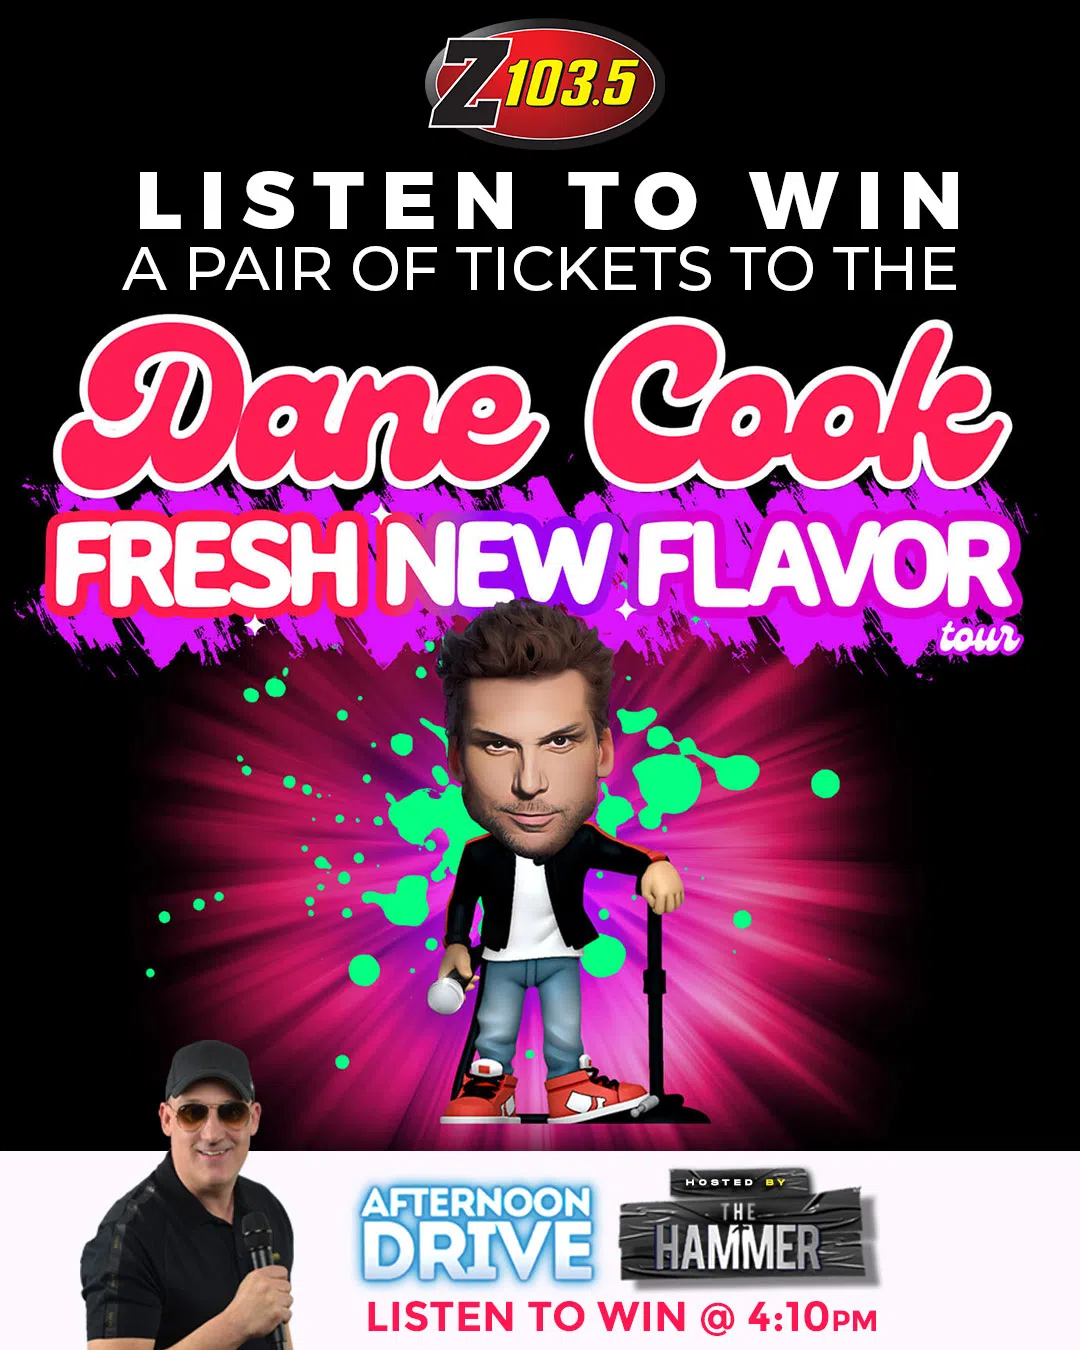 Feature: https://z1035.com/win/win-a-pair-of-tickets-to-see-dane-cook/